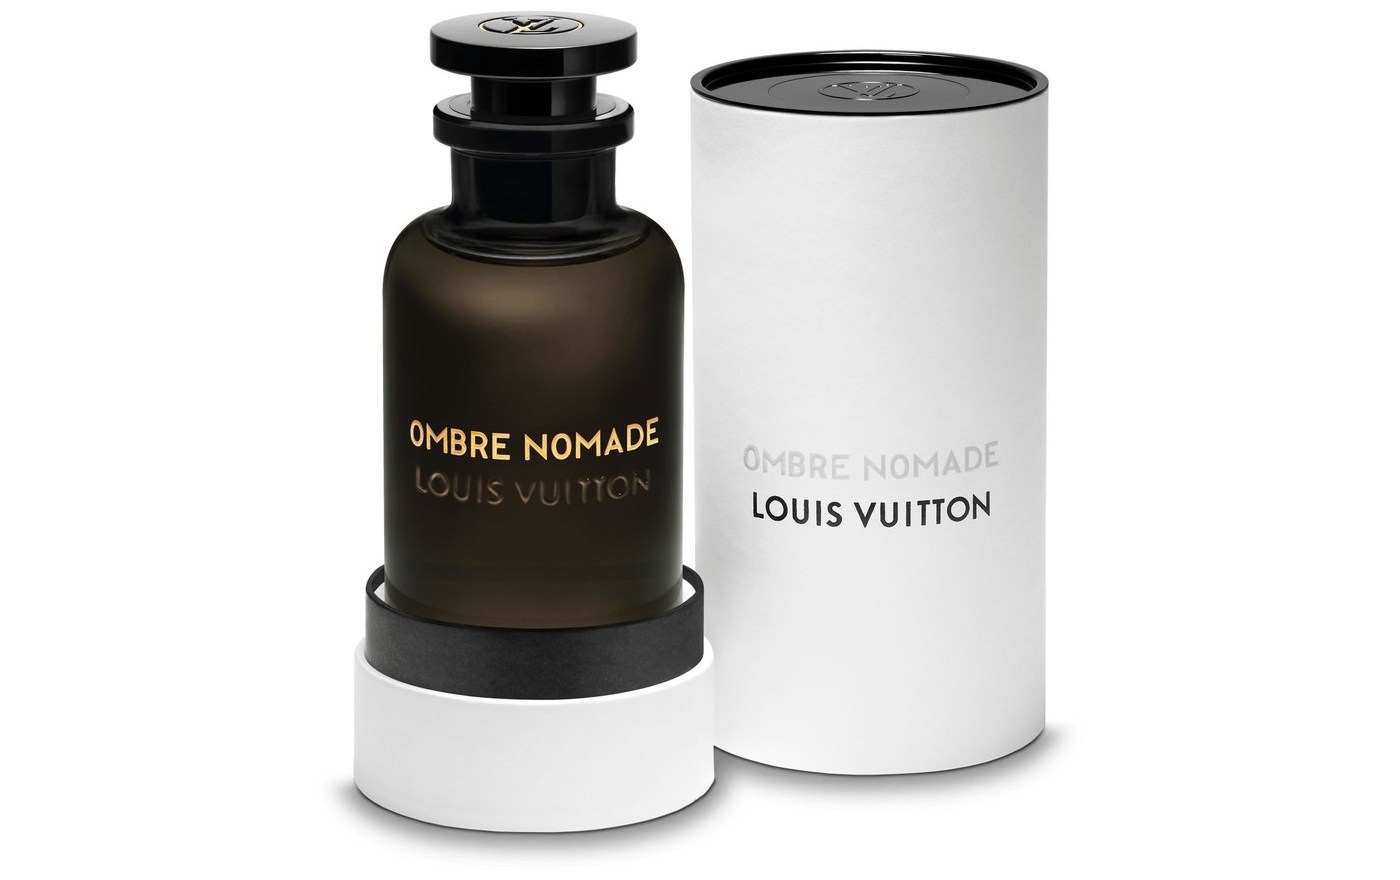 Louis Vuitton introduces its first ever Oud-enriched fragrance for men and women